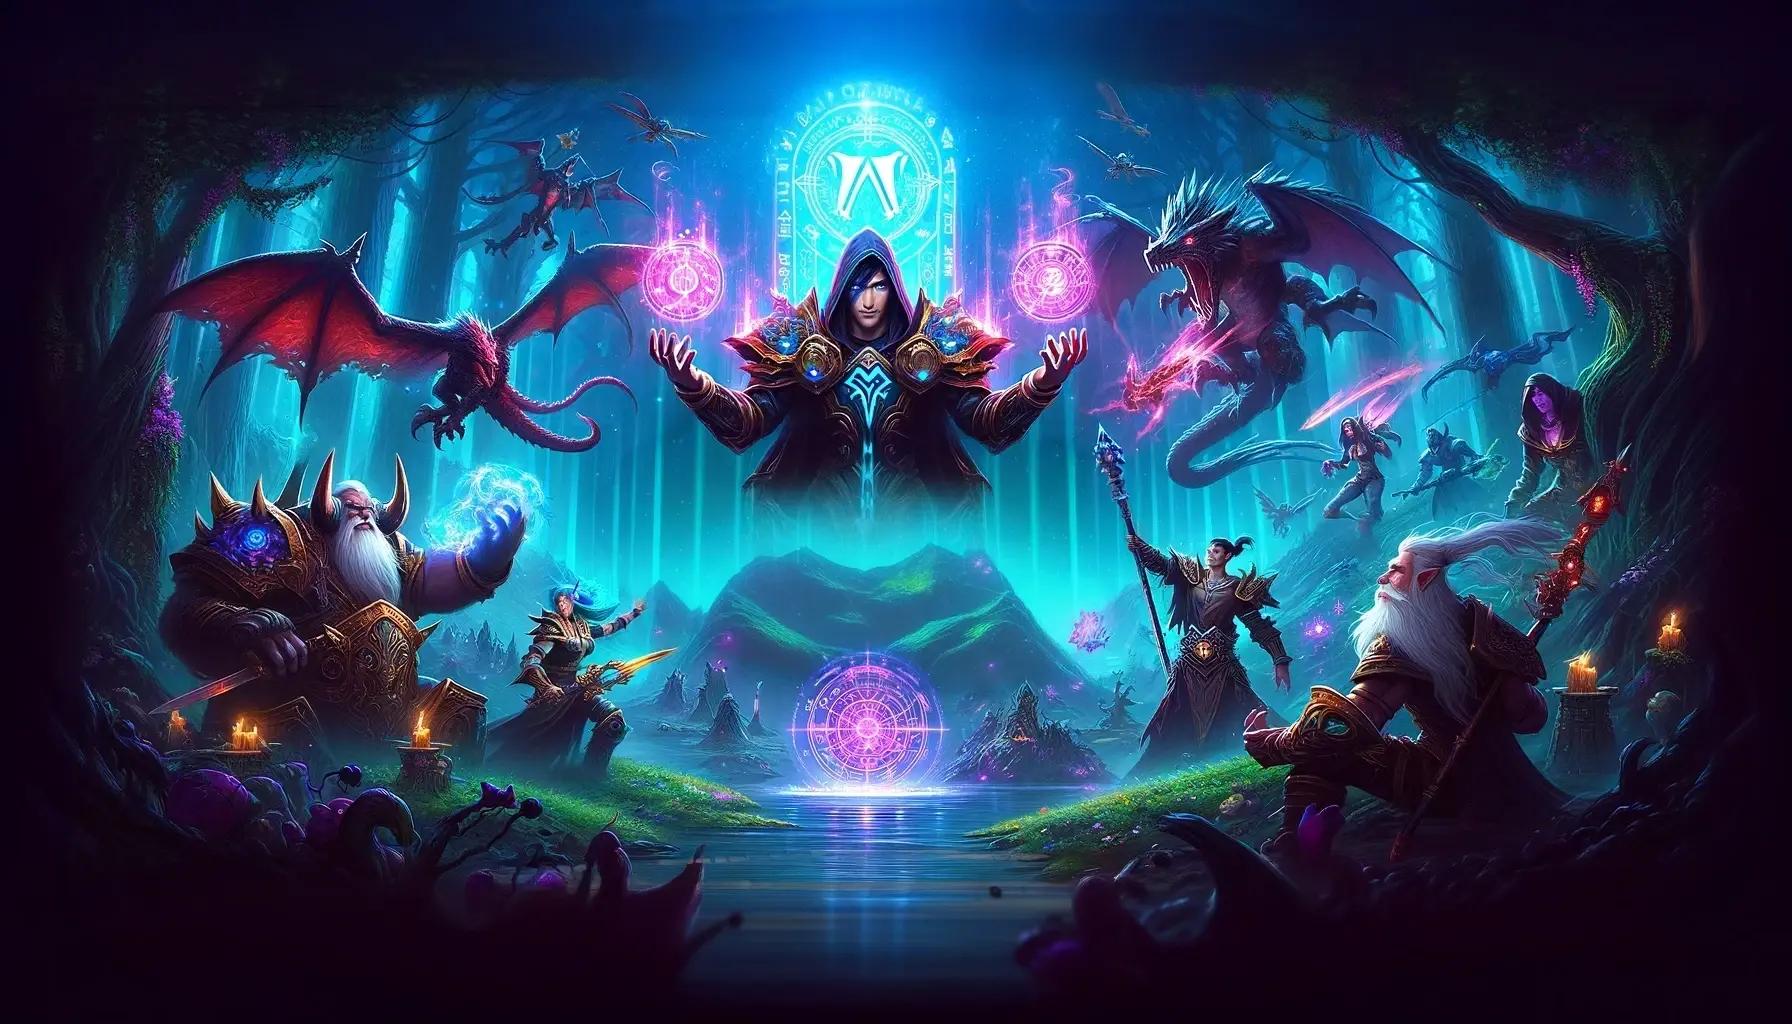 A fantasy-inspired design related to World of Warcraft with a dark, mystical background and vibrant, glowing magical elements